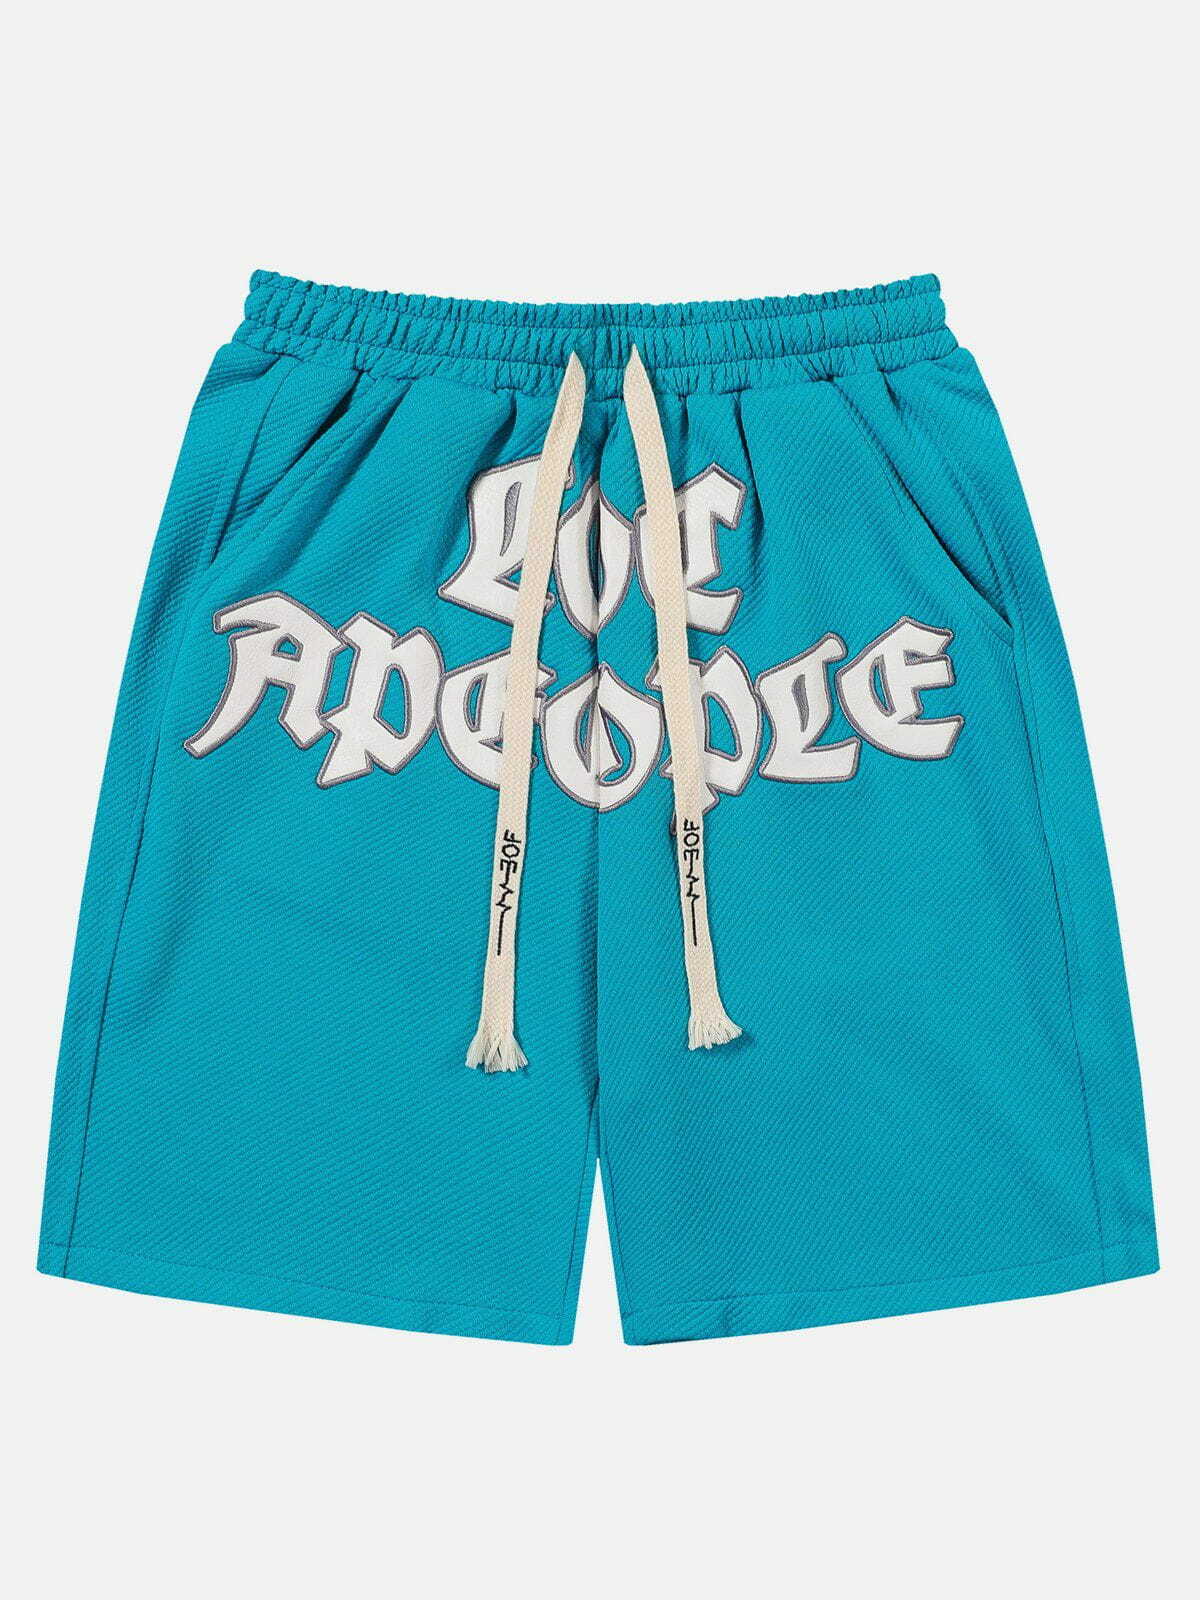 embroidered hip hop shorts urban streetwear essential 6913